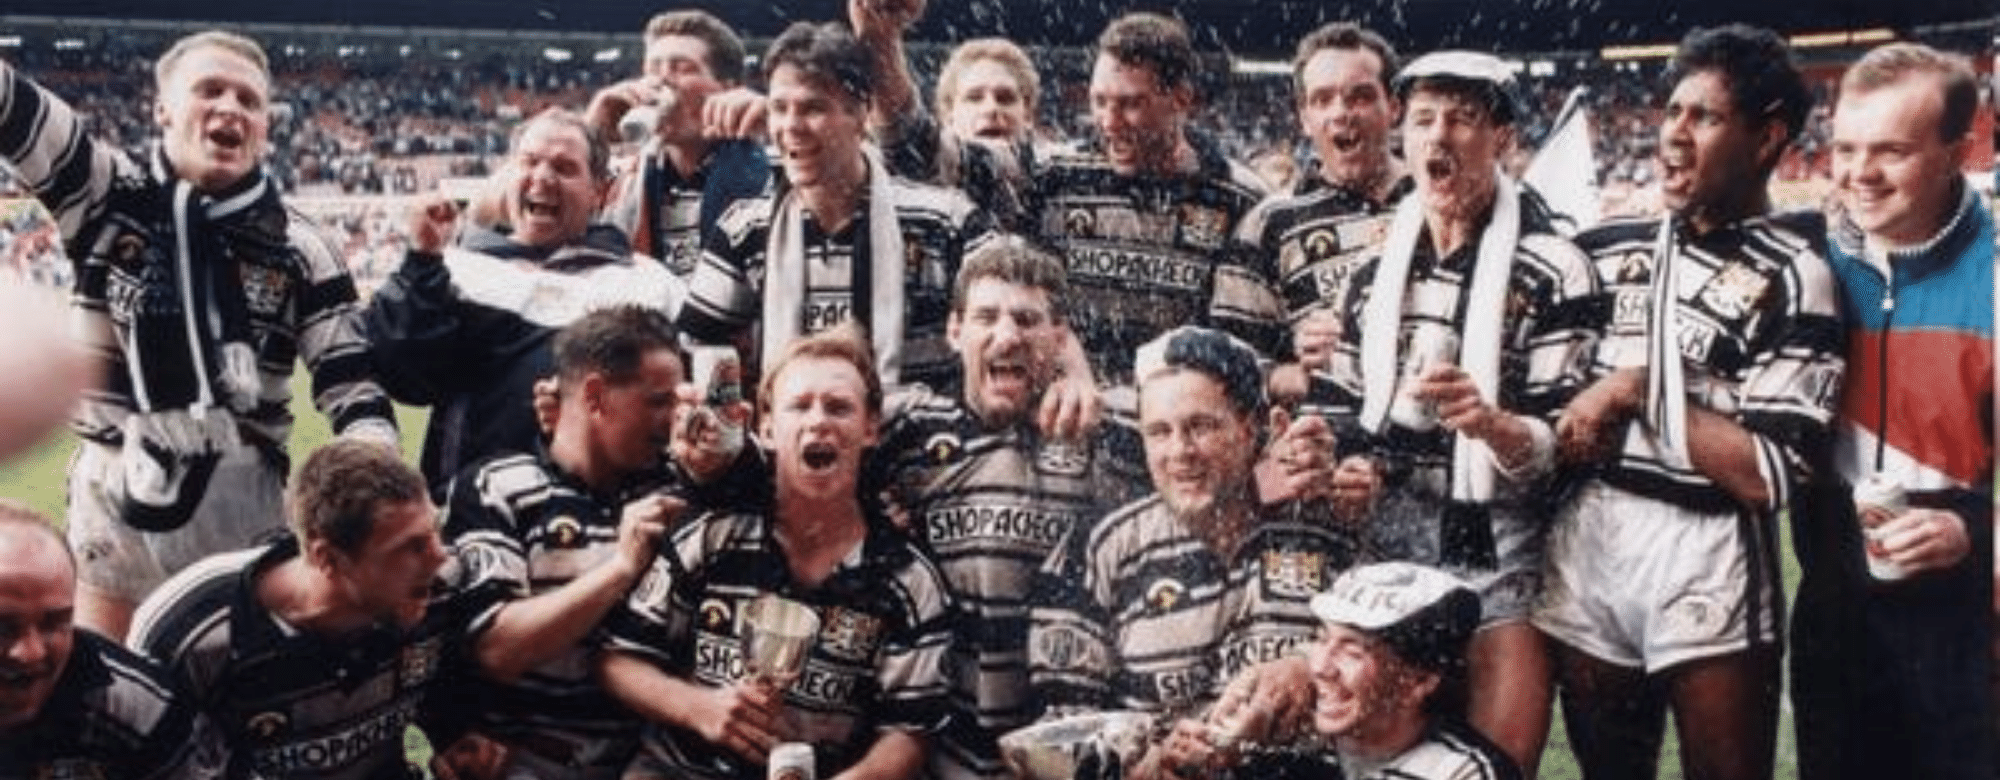 1991 Premiership Final Victory, 31 Years Ago Today